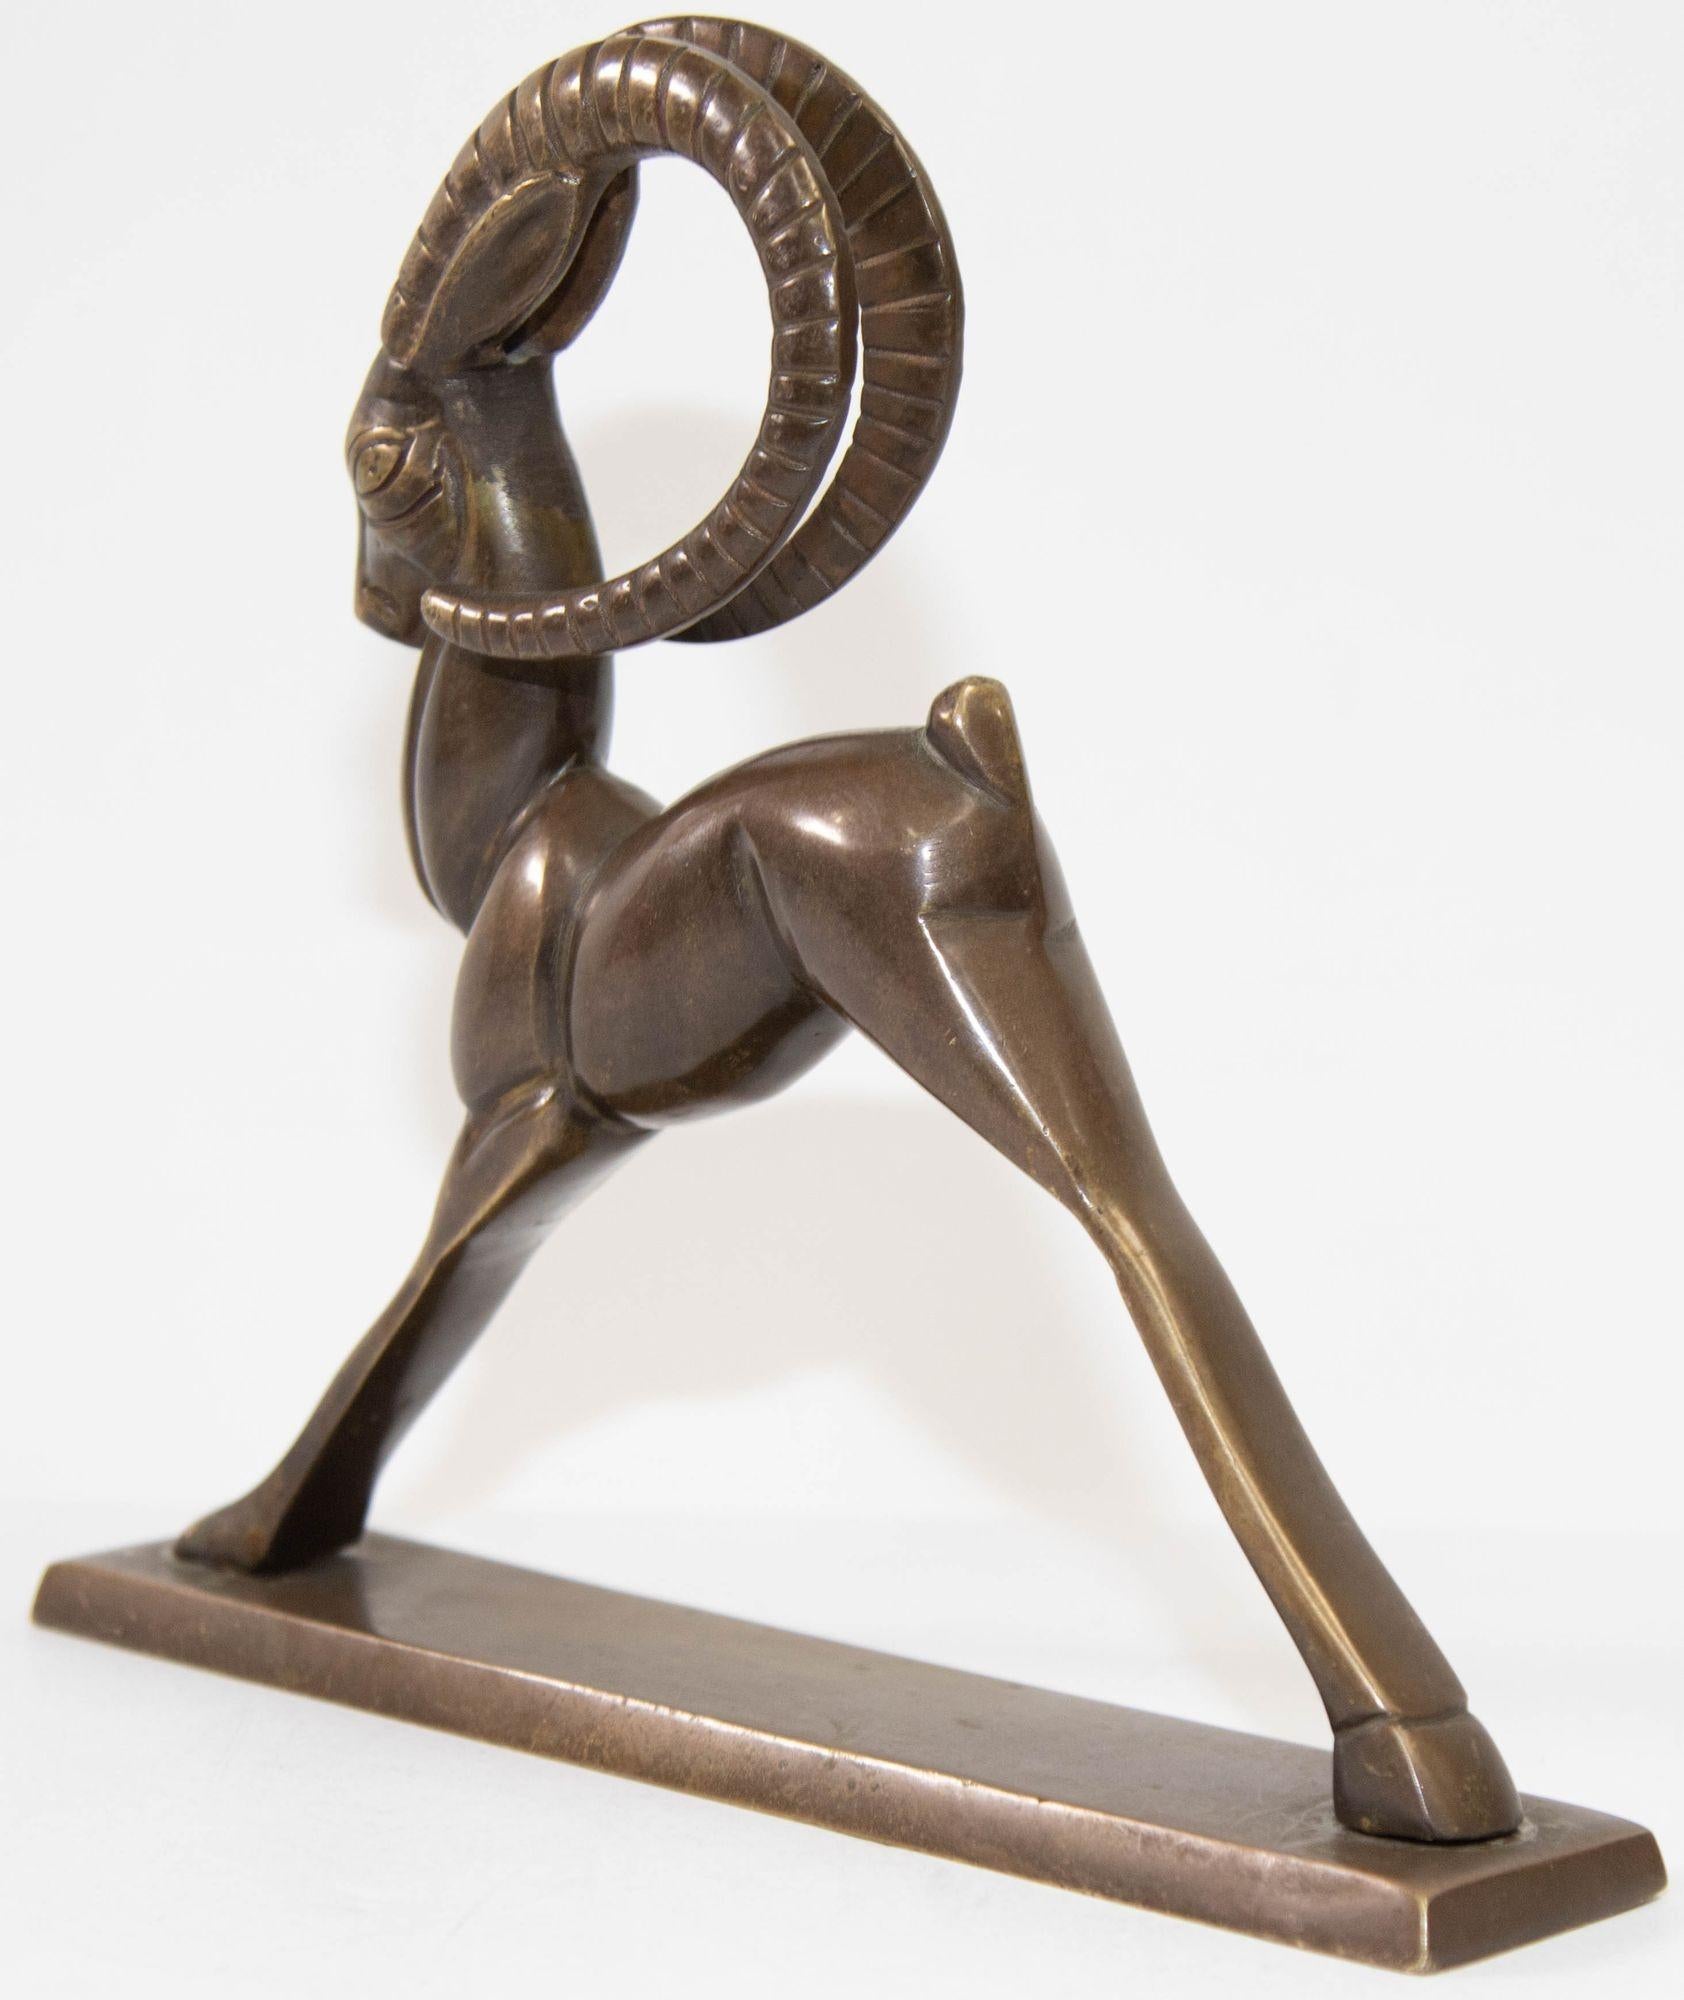 Vintage French Art Deco Style Sculpture of Brass Ibex Antelope 6